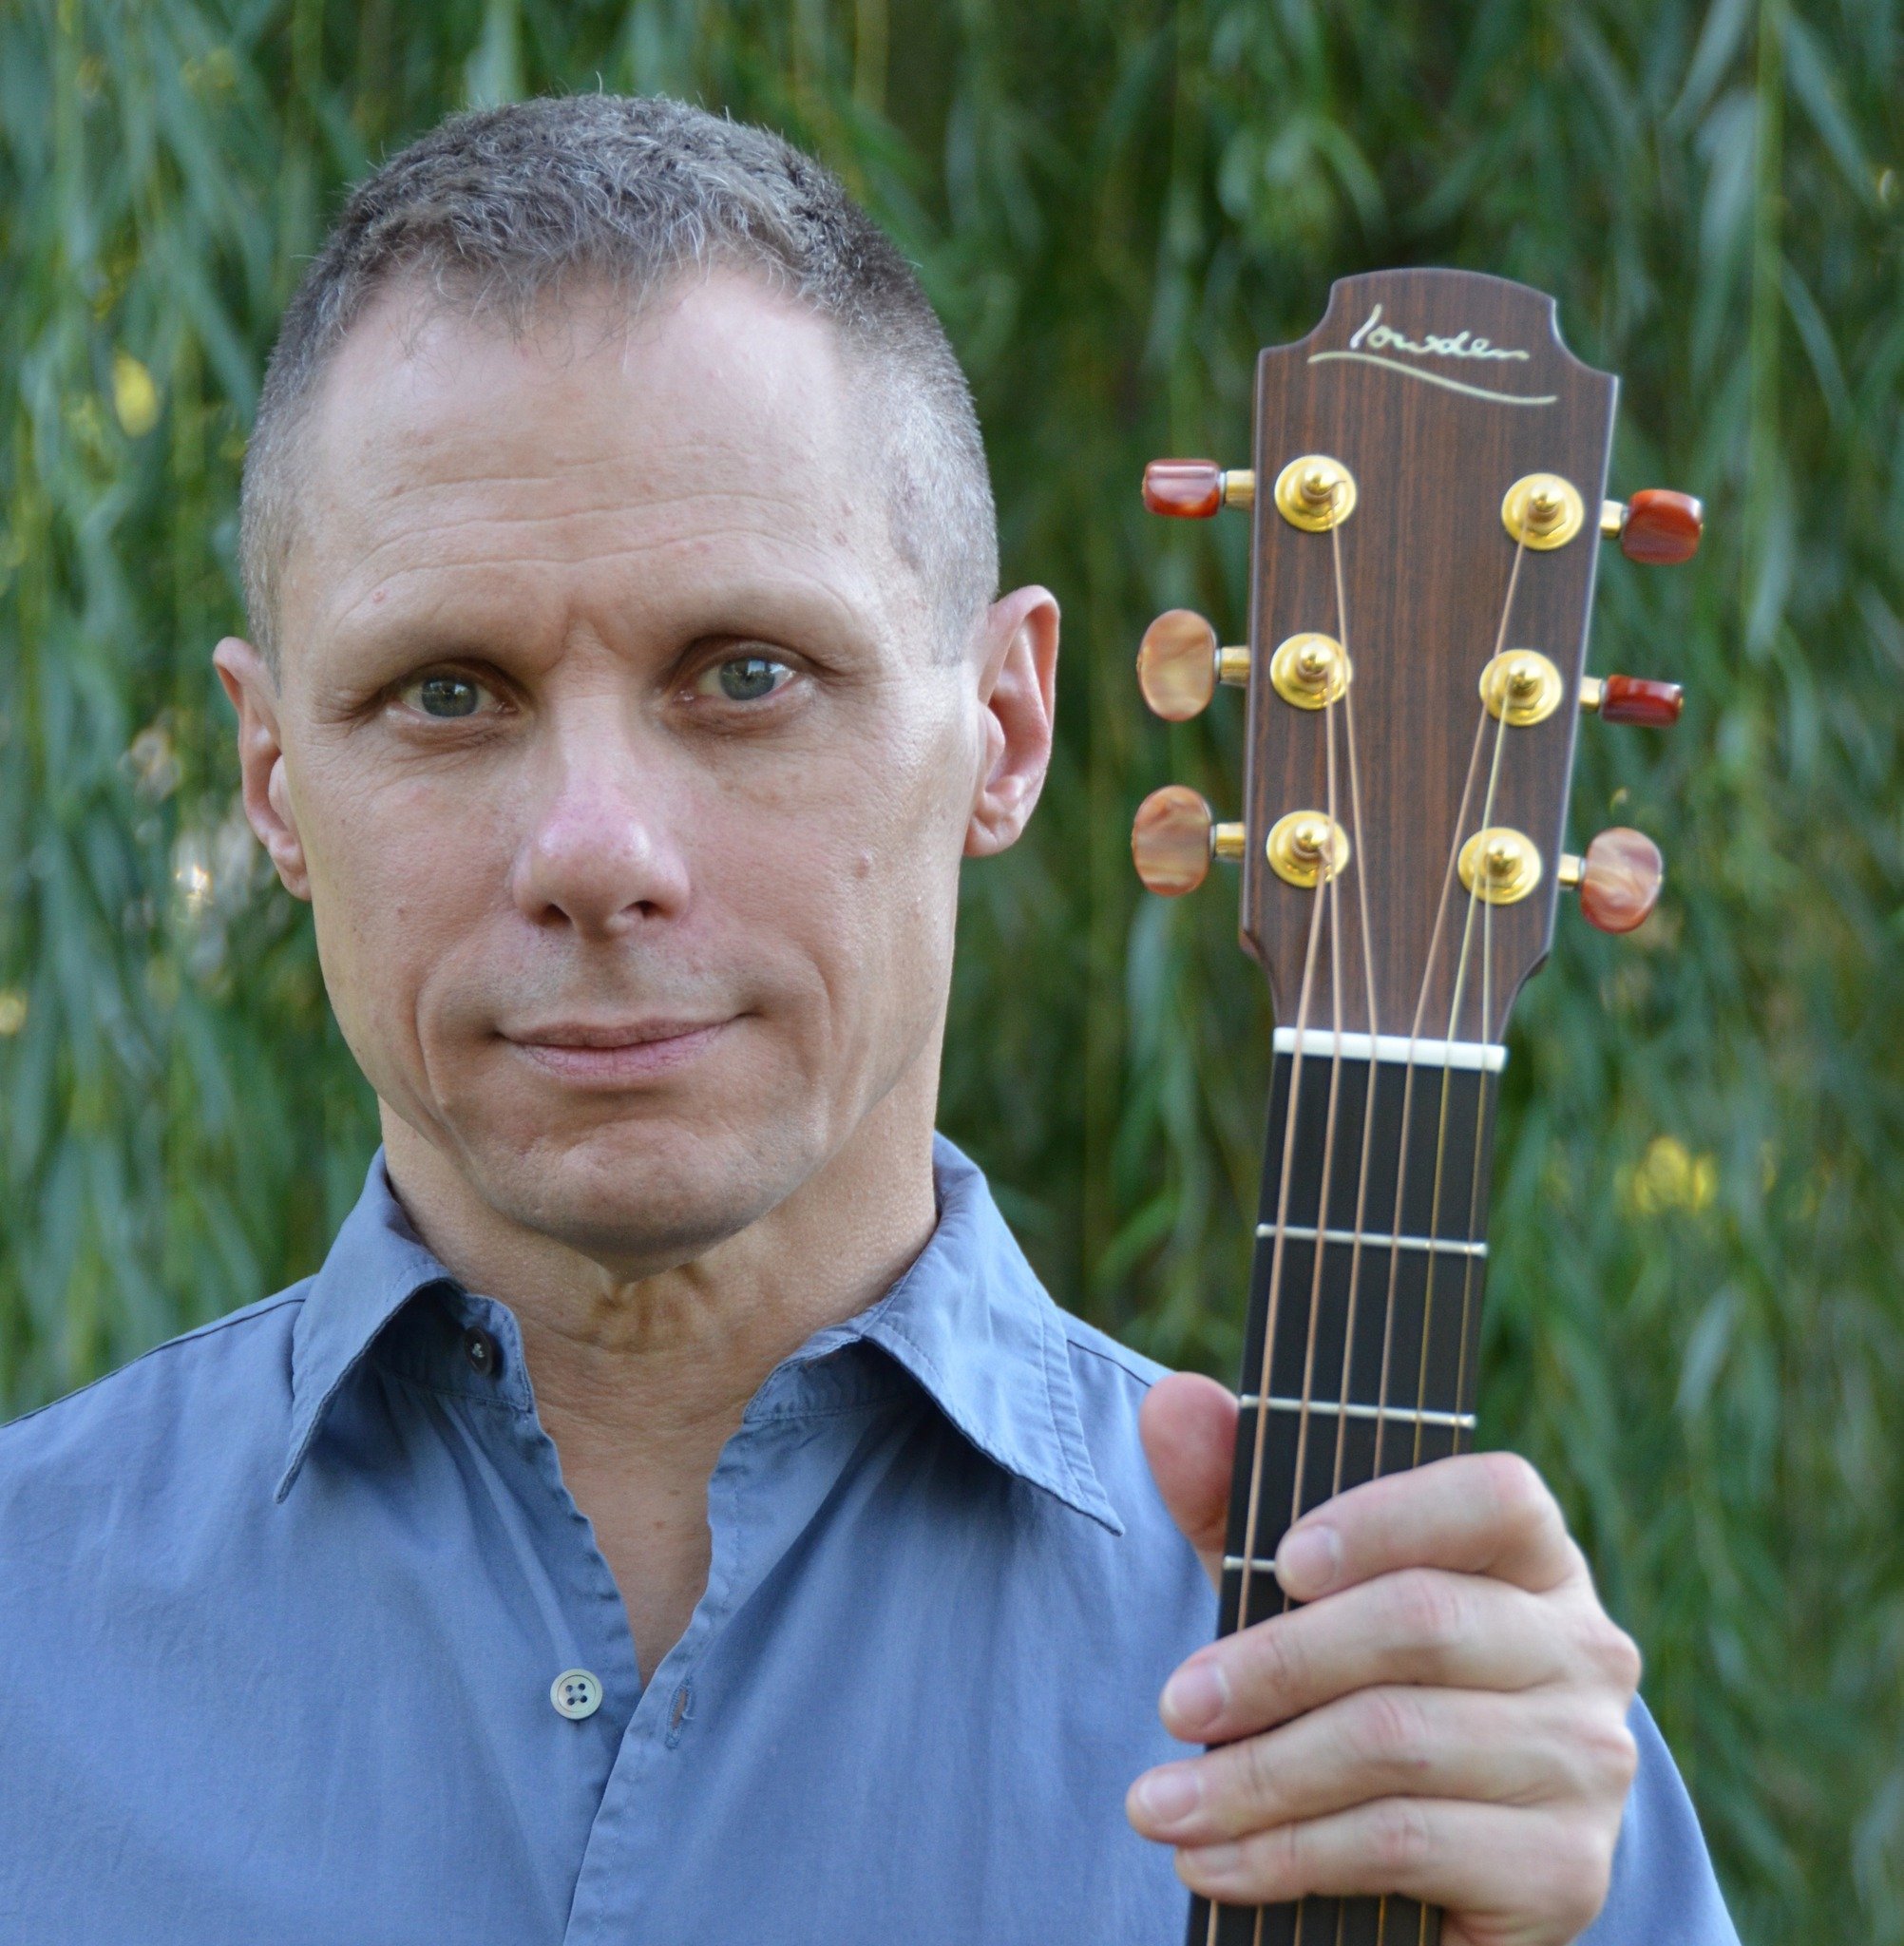 JUST ADDED! 
SONGWRITING workshop THIS SUNDAY with TODD MENTON! Sign up online at https://www.theripplecenter.com/minnesota-sign-up
SHOW TICKETS: https://www.ticketleap.events/events/the-ripple-center

About Todd: 
TODD MENTON is the lead singer, son